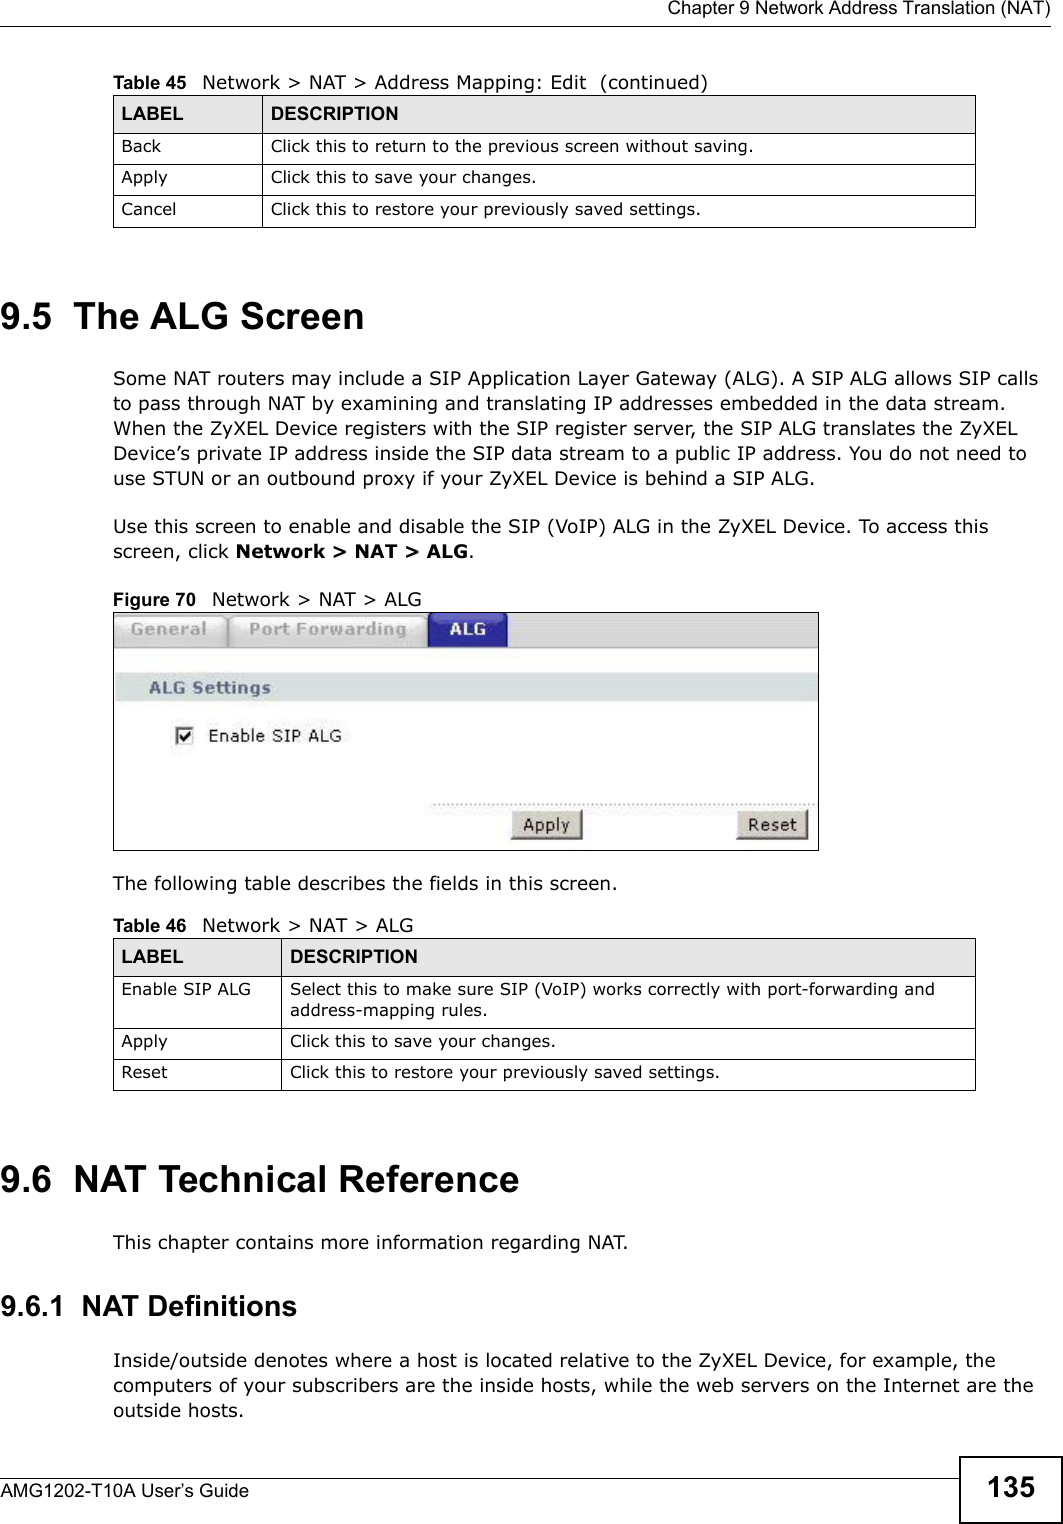  Chapter 9 Network Address Translation (NAT)AMG1202-T10A User’s Guide 1359.5  The ALG ScreenSome NAT routers may include a SIP Application Layer Gateway (ALG). A SIP ALG allows SIP calls to pass through NAT by examining and translating IP addresses embedded in the data stream. When the ZyXEL Device registers with the SIP register server, the SIP ALG translates the ZyXEL Device’s private IP address inside the SIP data stream to a public IP address. You do not need to use STUN or an outbound proxy if your ZyXEL Device is behind a SIP ALG.Use this screen to enable and disable the SIP (VoIP) ALG in the ZyXEL Device. To access this screen, click Network &gt; NAT &gt; ALG.Figure 70   Network &gt; NAT &gt; ALGThe following table describes the fields in this screen.9.6  NAT Technical ReferenceThis chapter contains more information regarding NAT.9.6.1  NAT DefinitionsInside/outside denotes where a host is located relative to the ZyXEL Device, for example, the computers of your subscribers are the inside hosts, while the web servers on the Internet are the outside hosts. Back Click this to return to the previous screen without saving.Apply Click this to save your changes.Cancel Click this to restore your previously saved settings.Table 45   Network &gt; NAT &gt; Address Mapping: Edit  (continued)LABEL DESCRIPTIONTable 46   Network &gt; NAT &gt; ALGLABEL DESCRIPTIONEnable SIP ALG Select this to make sure SIP (VoIP) works correctly with port-forwarding and address-mapping rules.Apply Click this to save your changes.Reset Click this to restore your previously saved settings.